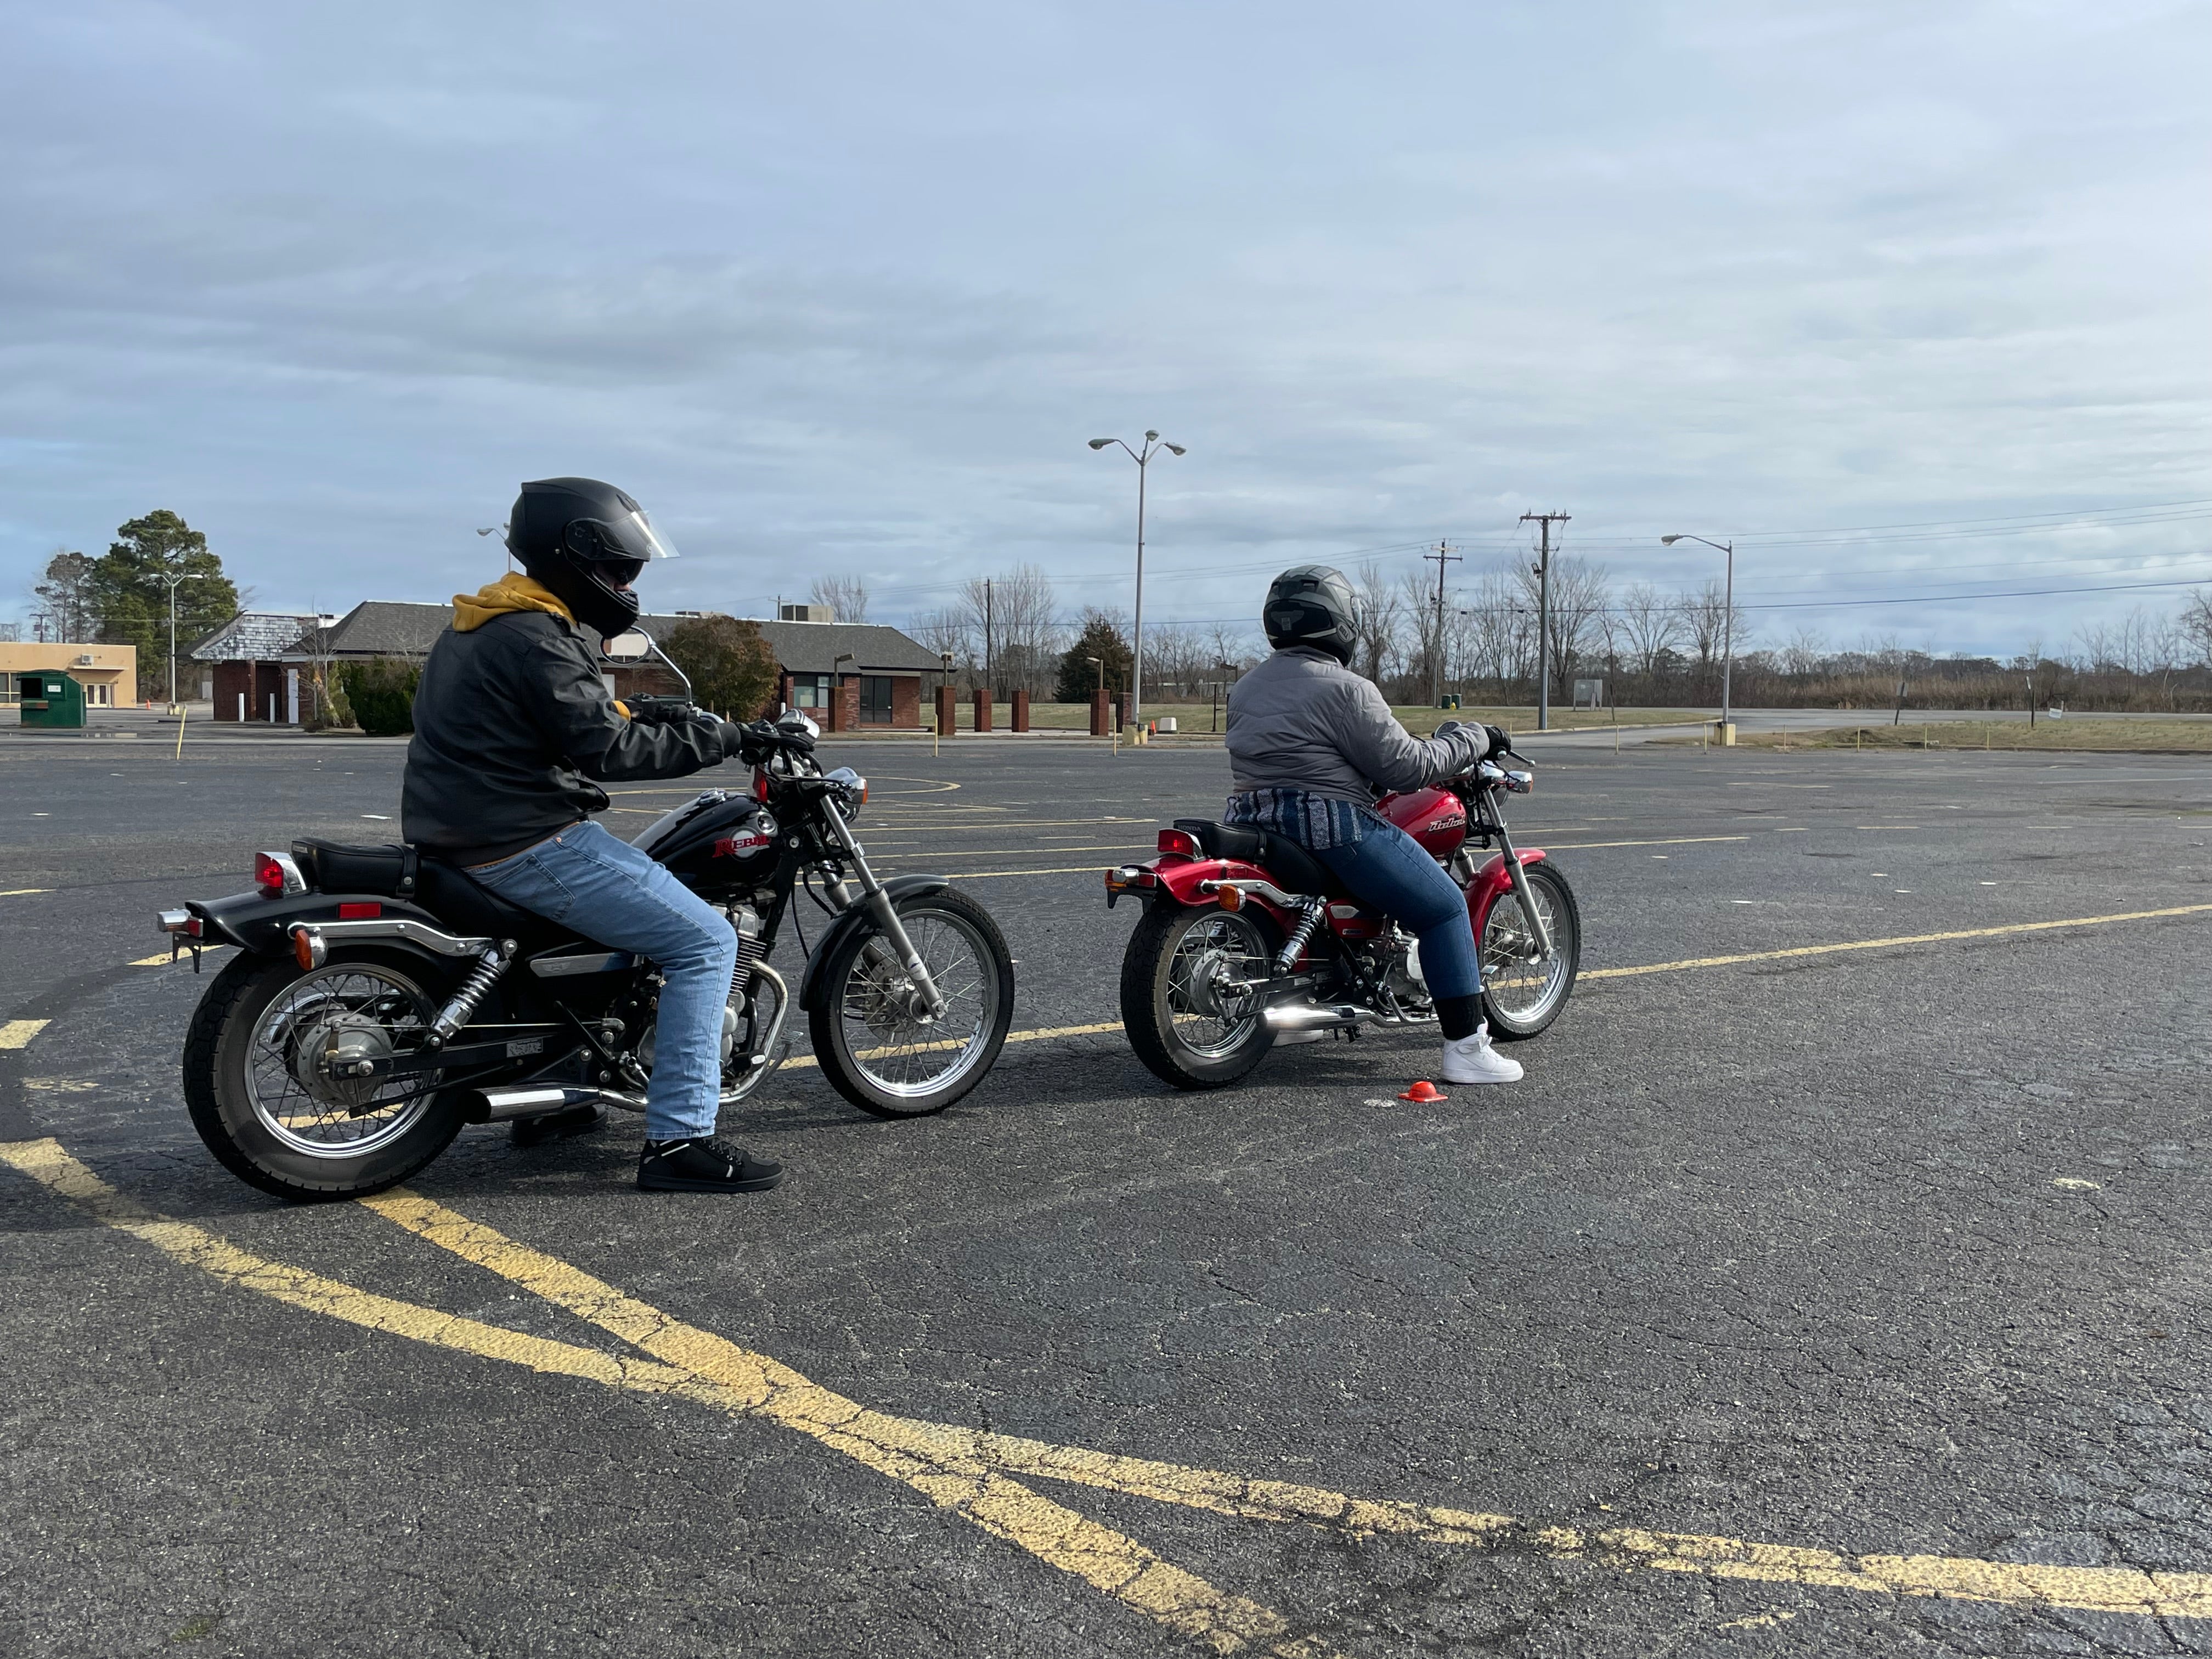 Basic Rider Course May 11-12 (8am – 5pm)